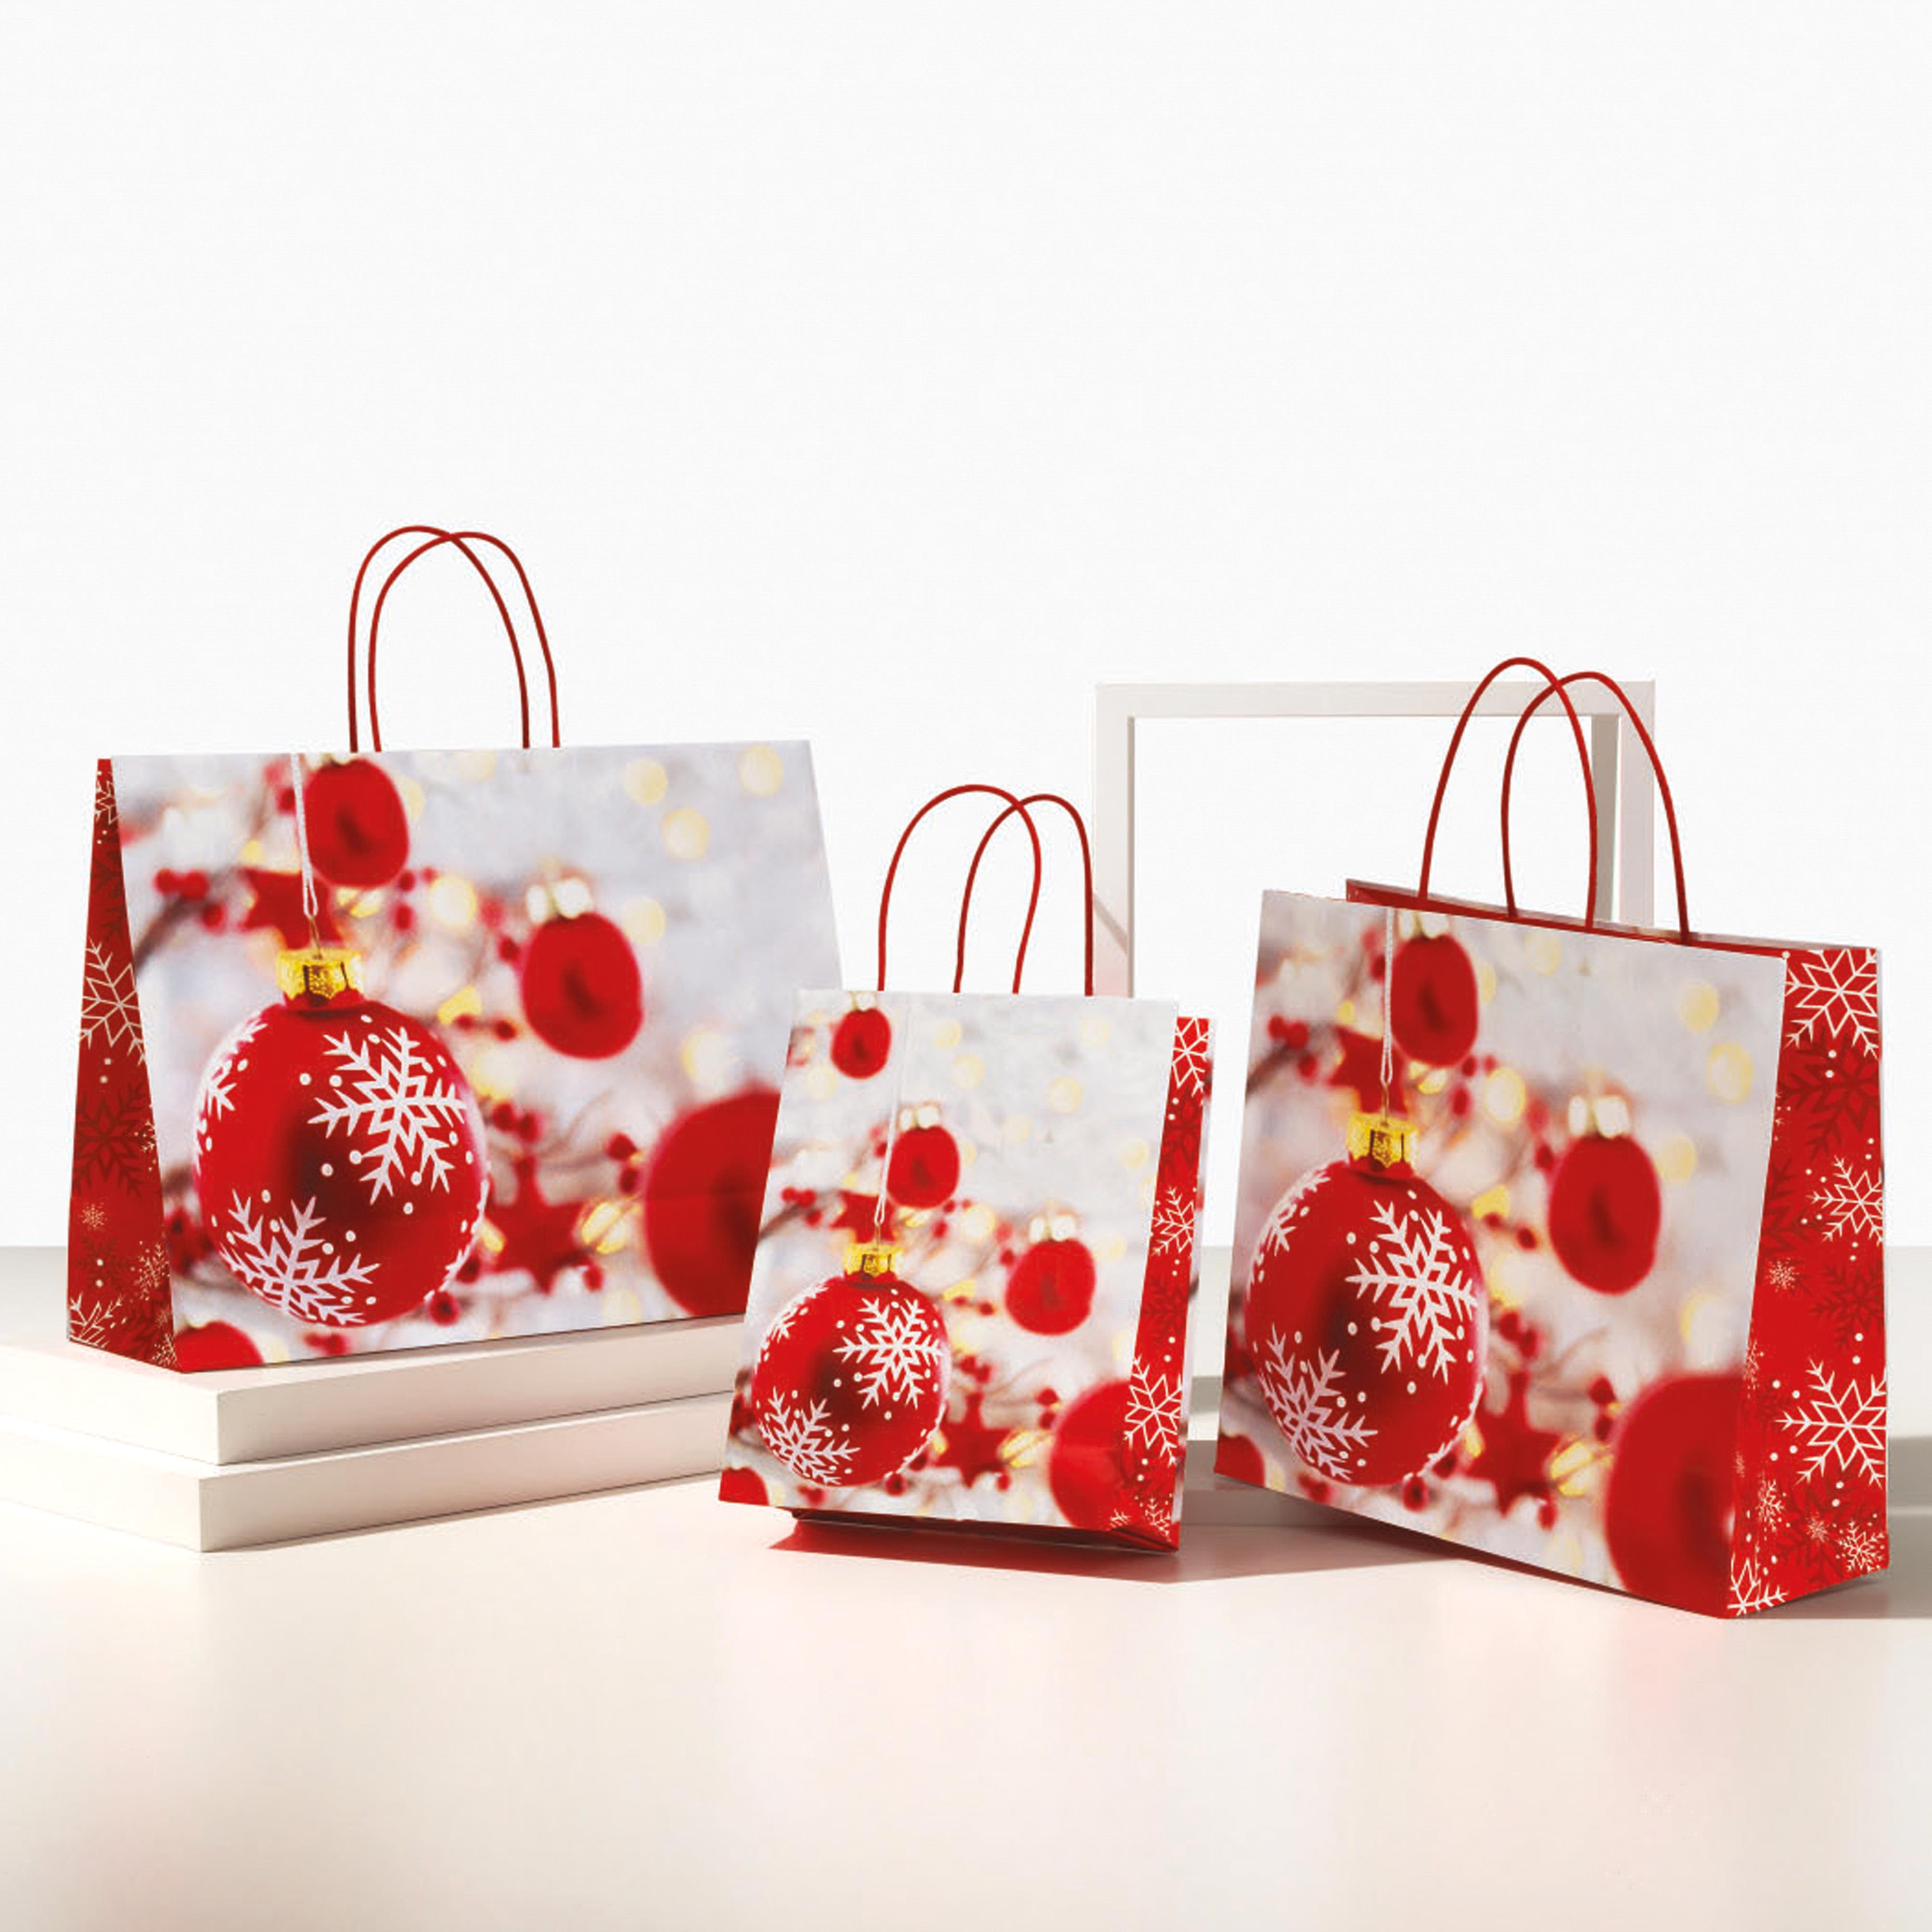 CHRISTMAS ITEMS, BOXES, BASKETS,DISHES, VARIOUS BAGS AND CONTAINERS, SHOPPERS 35+13X31+6 CM NATALIZIE